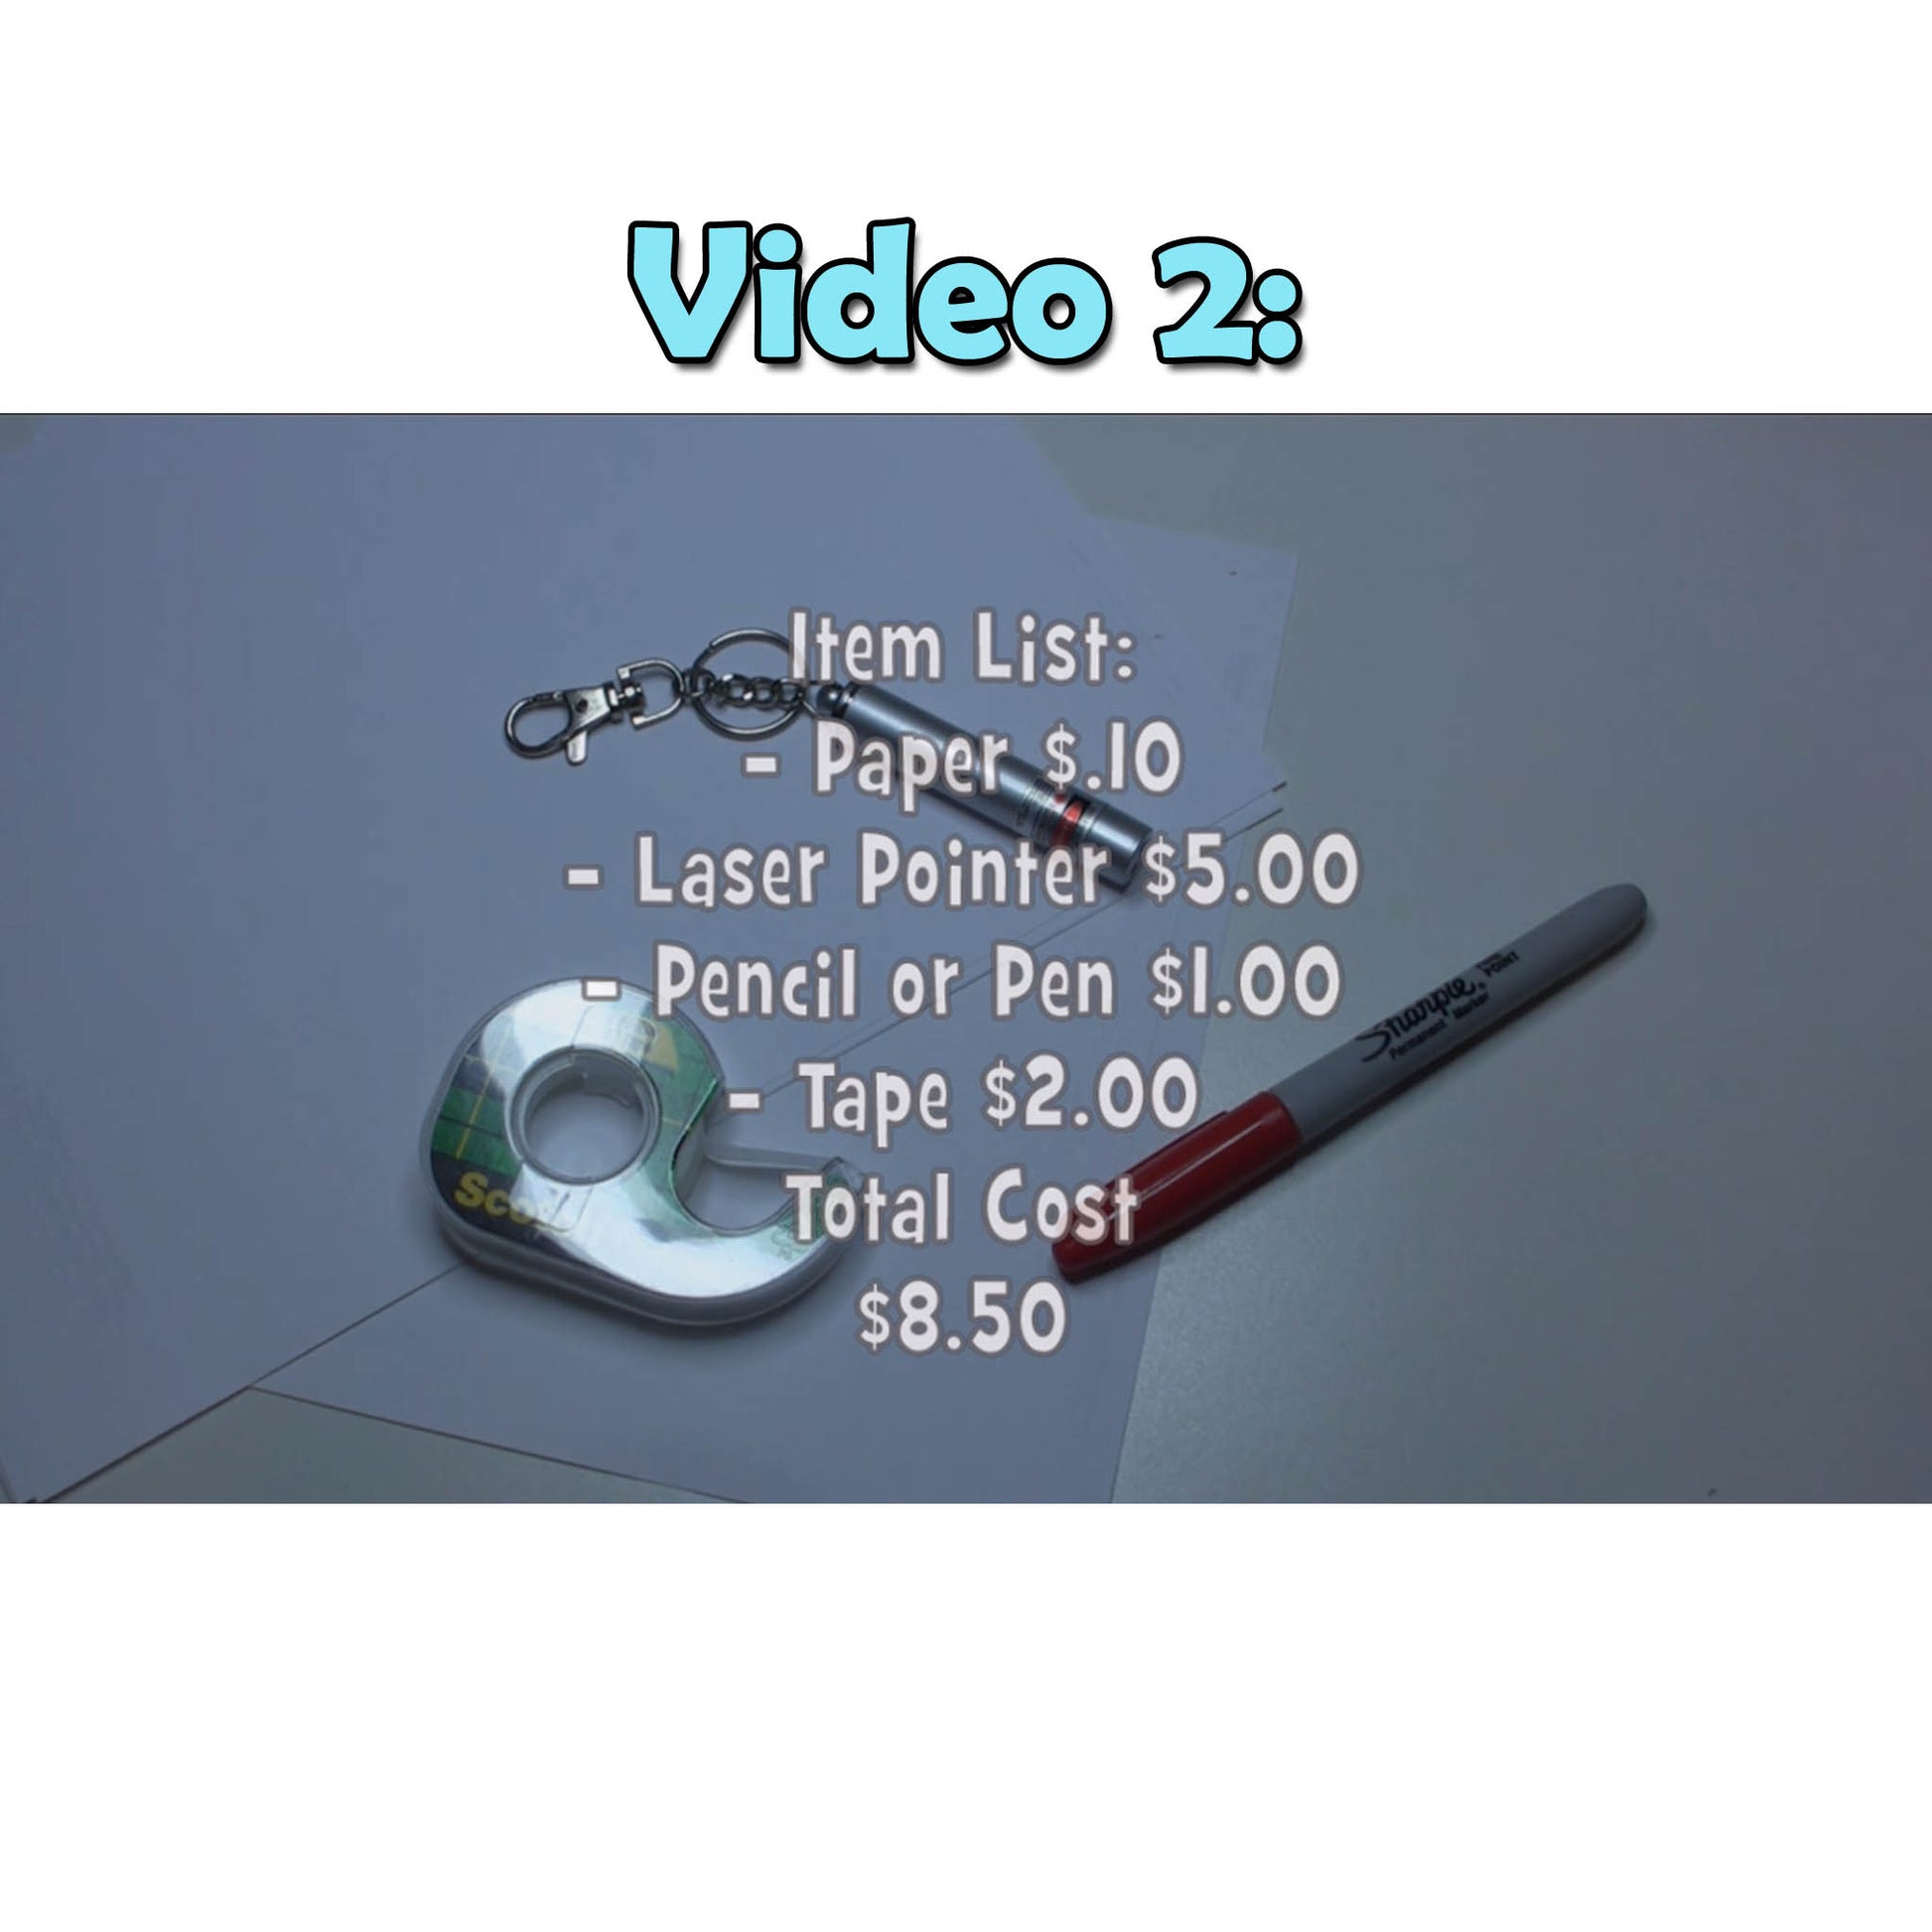 Video 2 of item lists needed to animate your camera on a low budget.